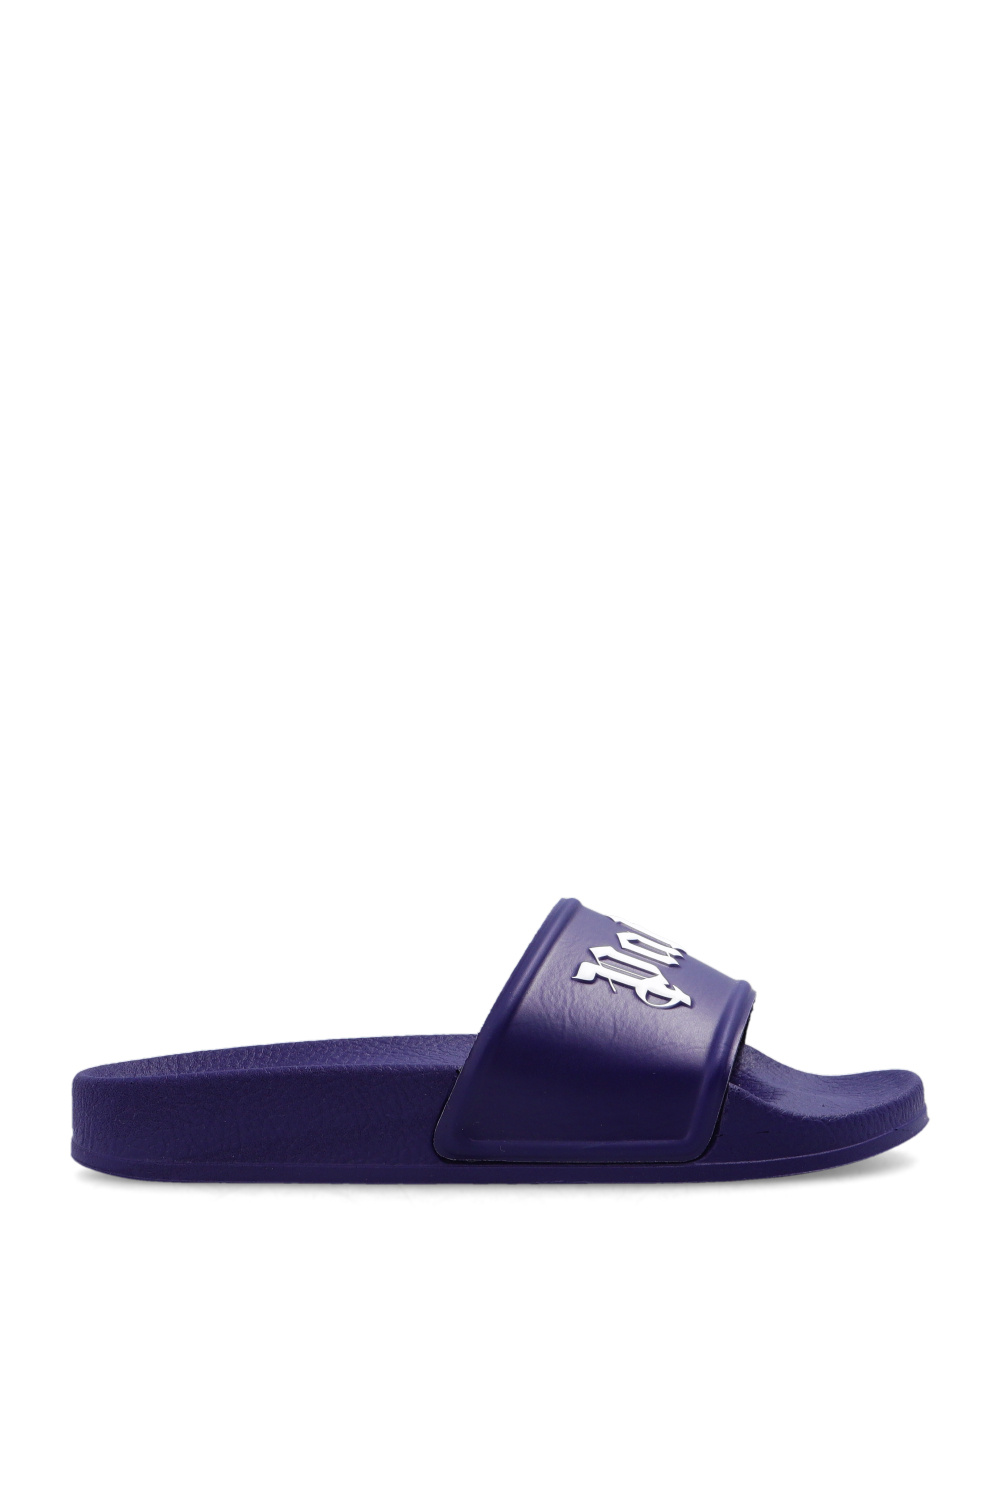 landmark shoe deal with Slides with logo